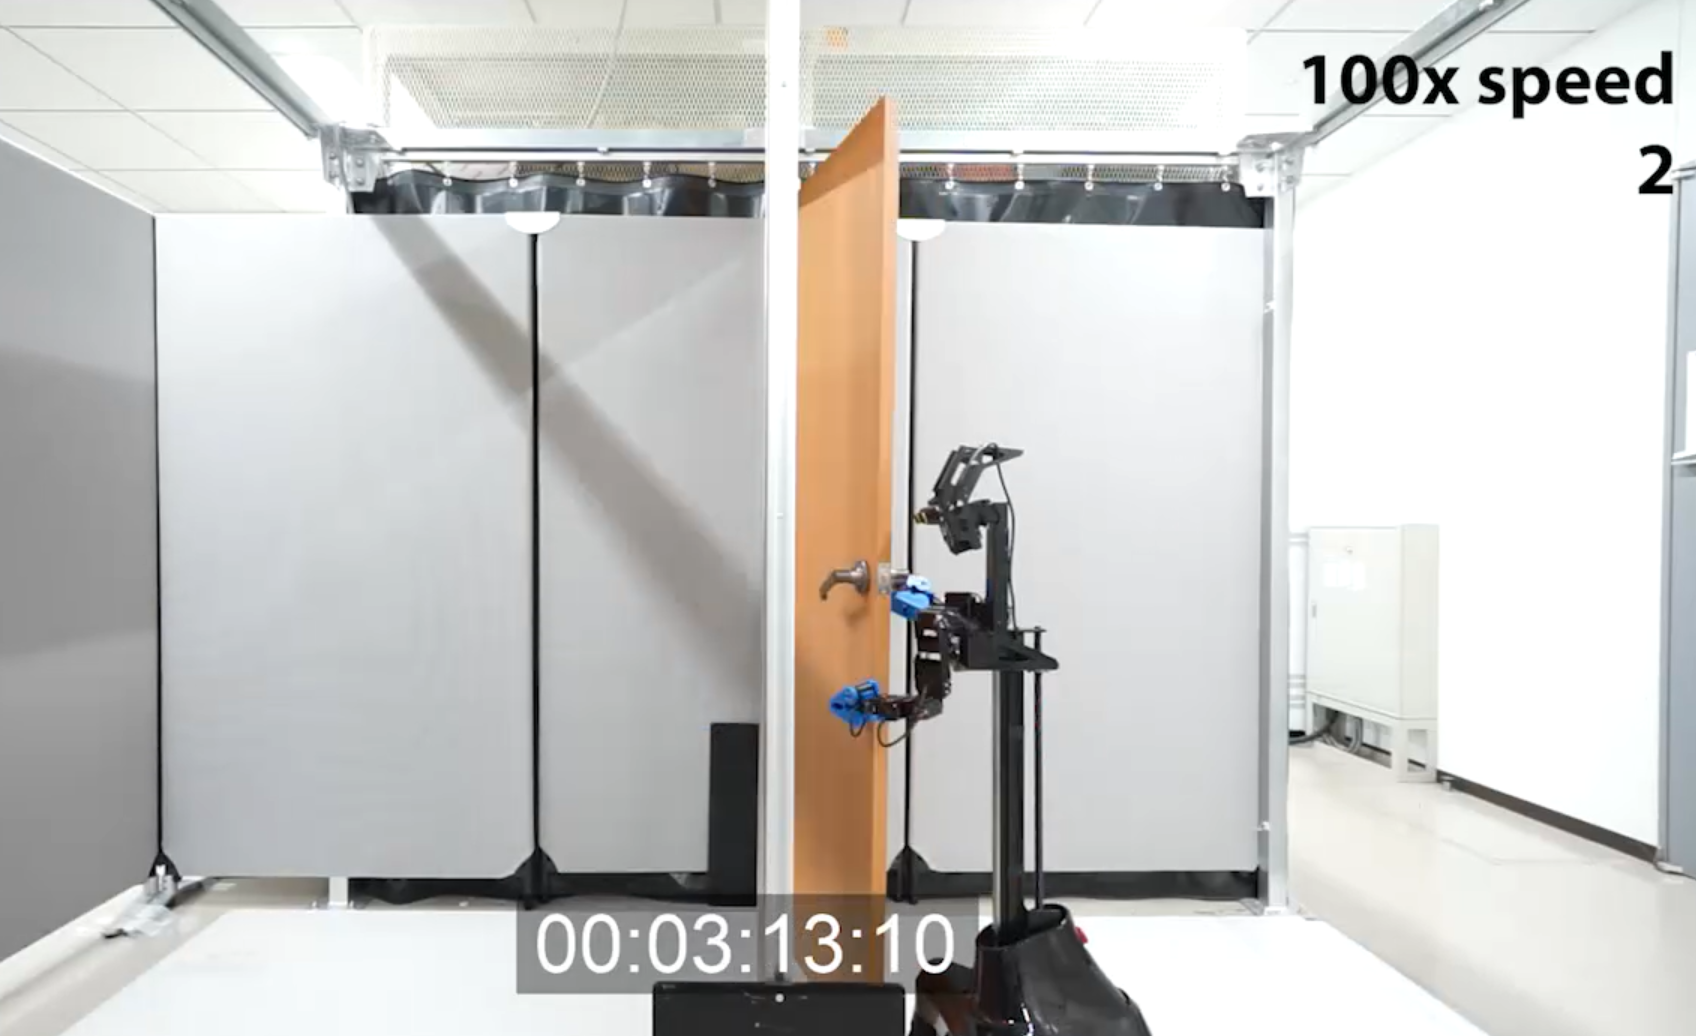 Video Shows Artificially Intelligent Robot Learning To Open Door